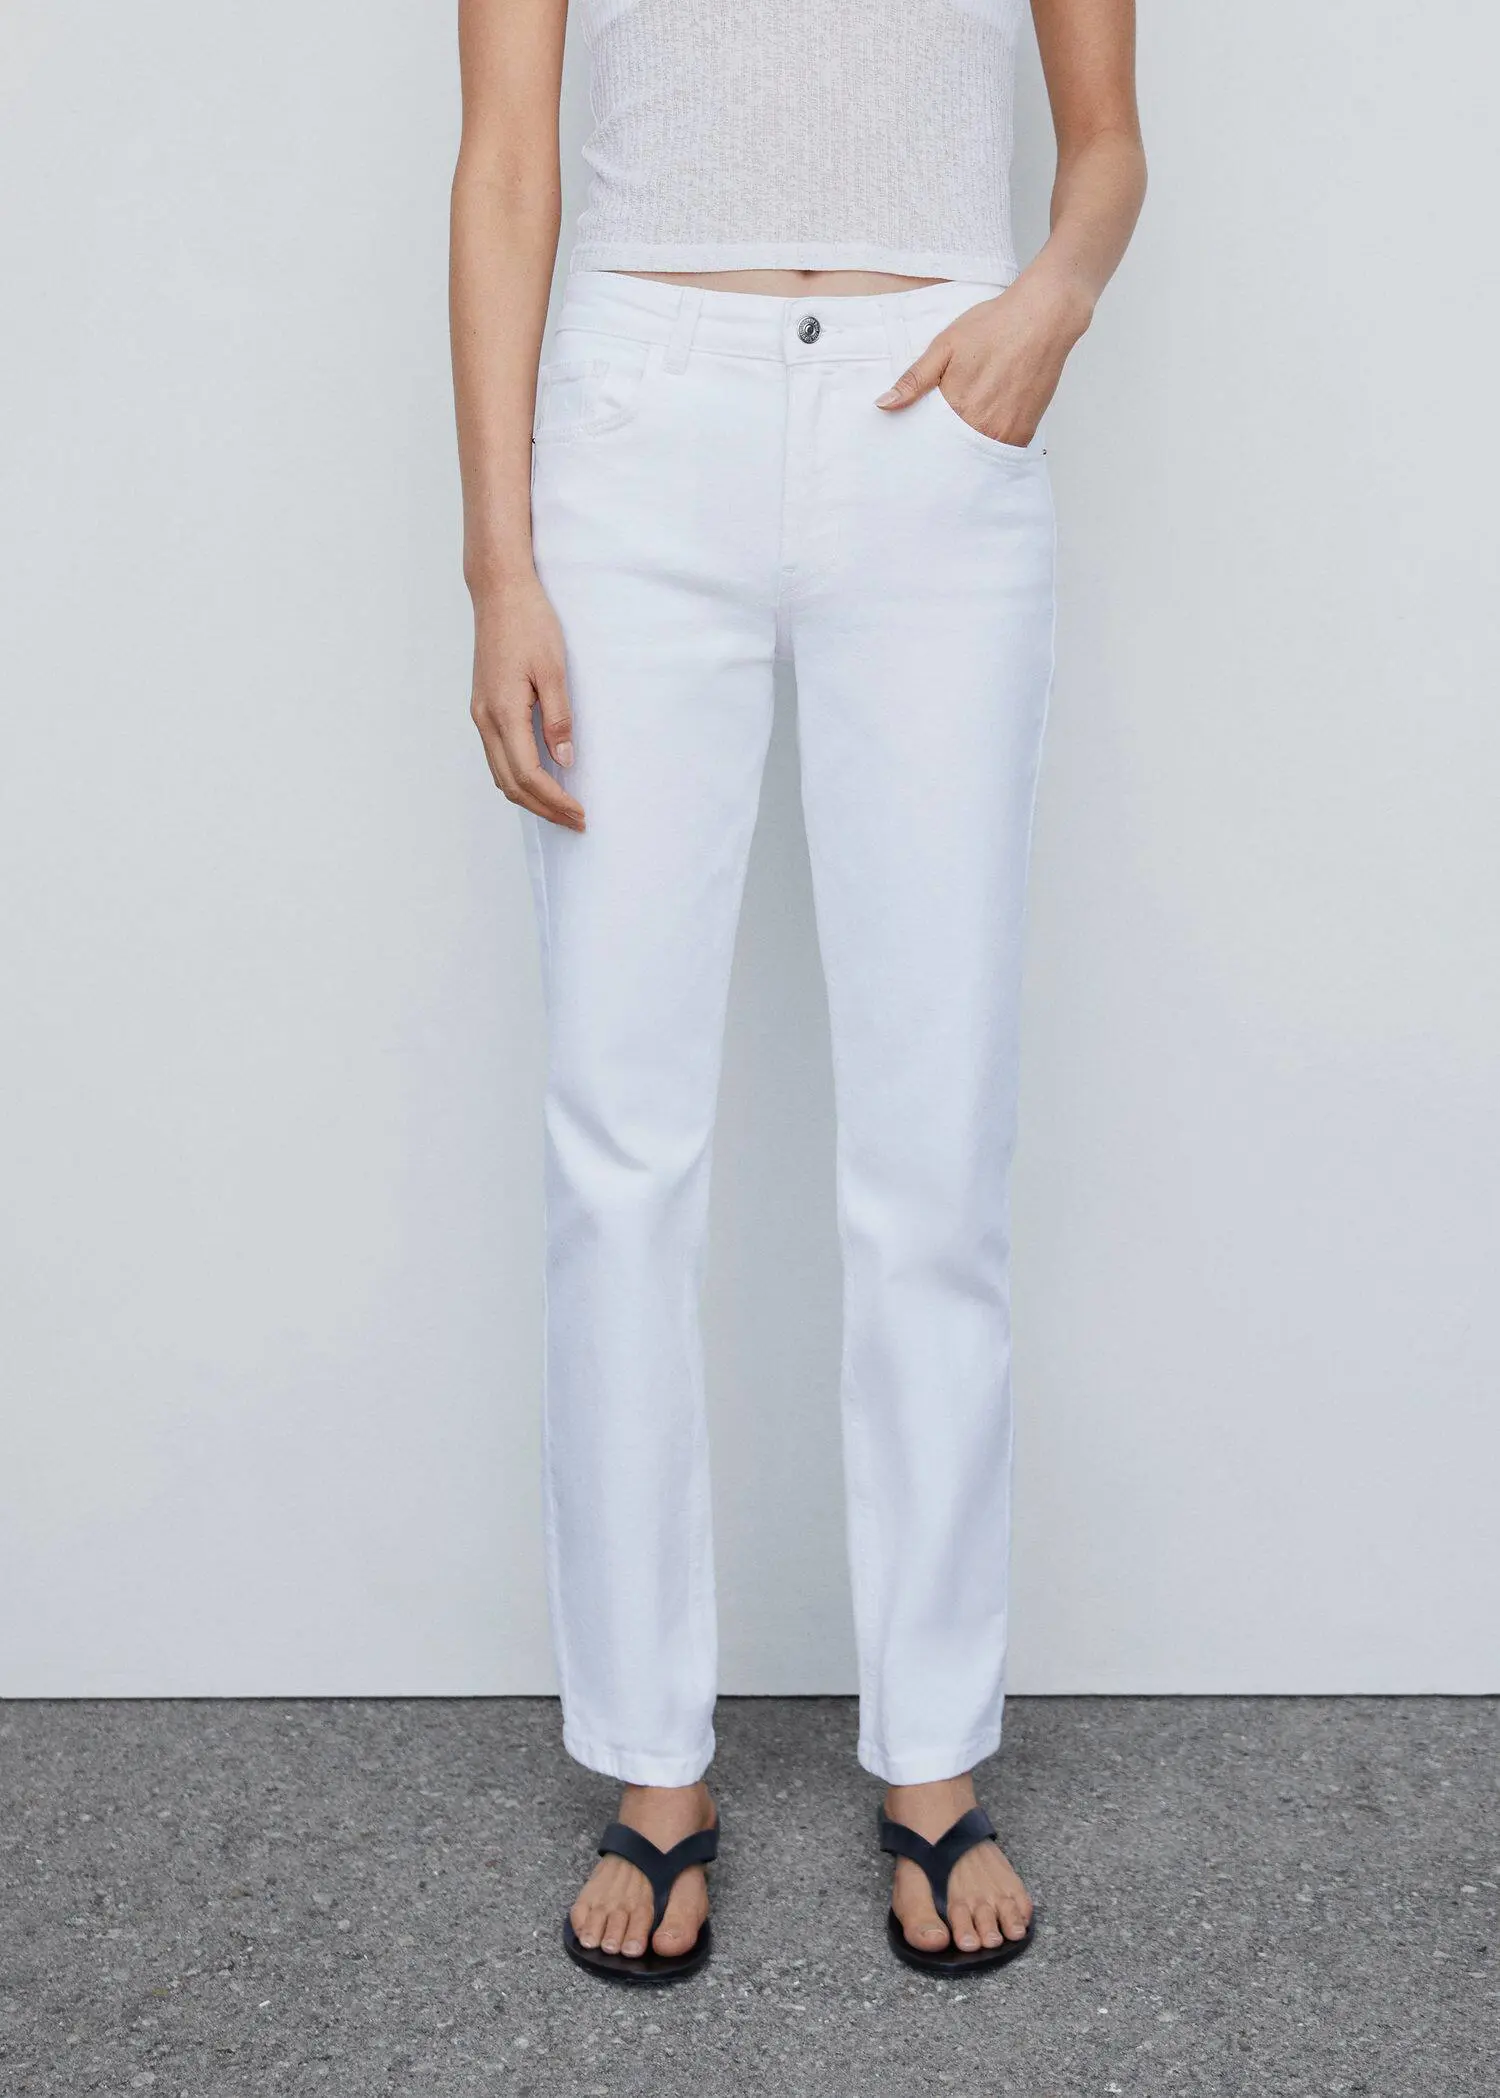 Mango Medium-comfort straight jeans. a person standing in front of a white wall. 